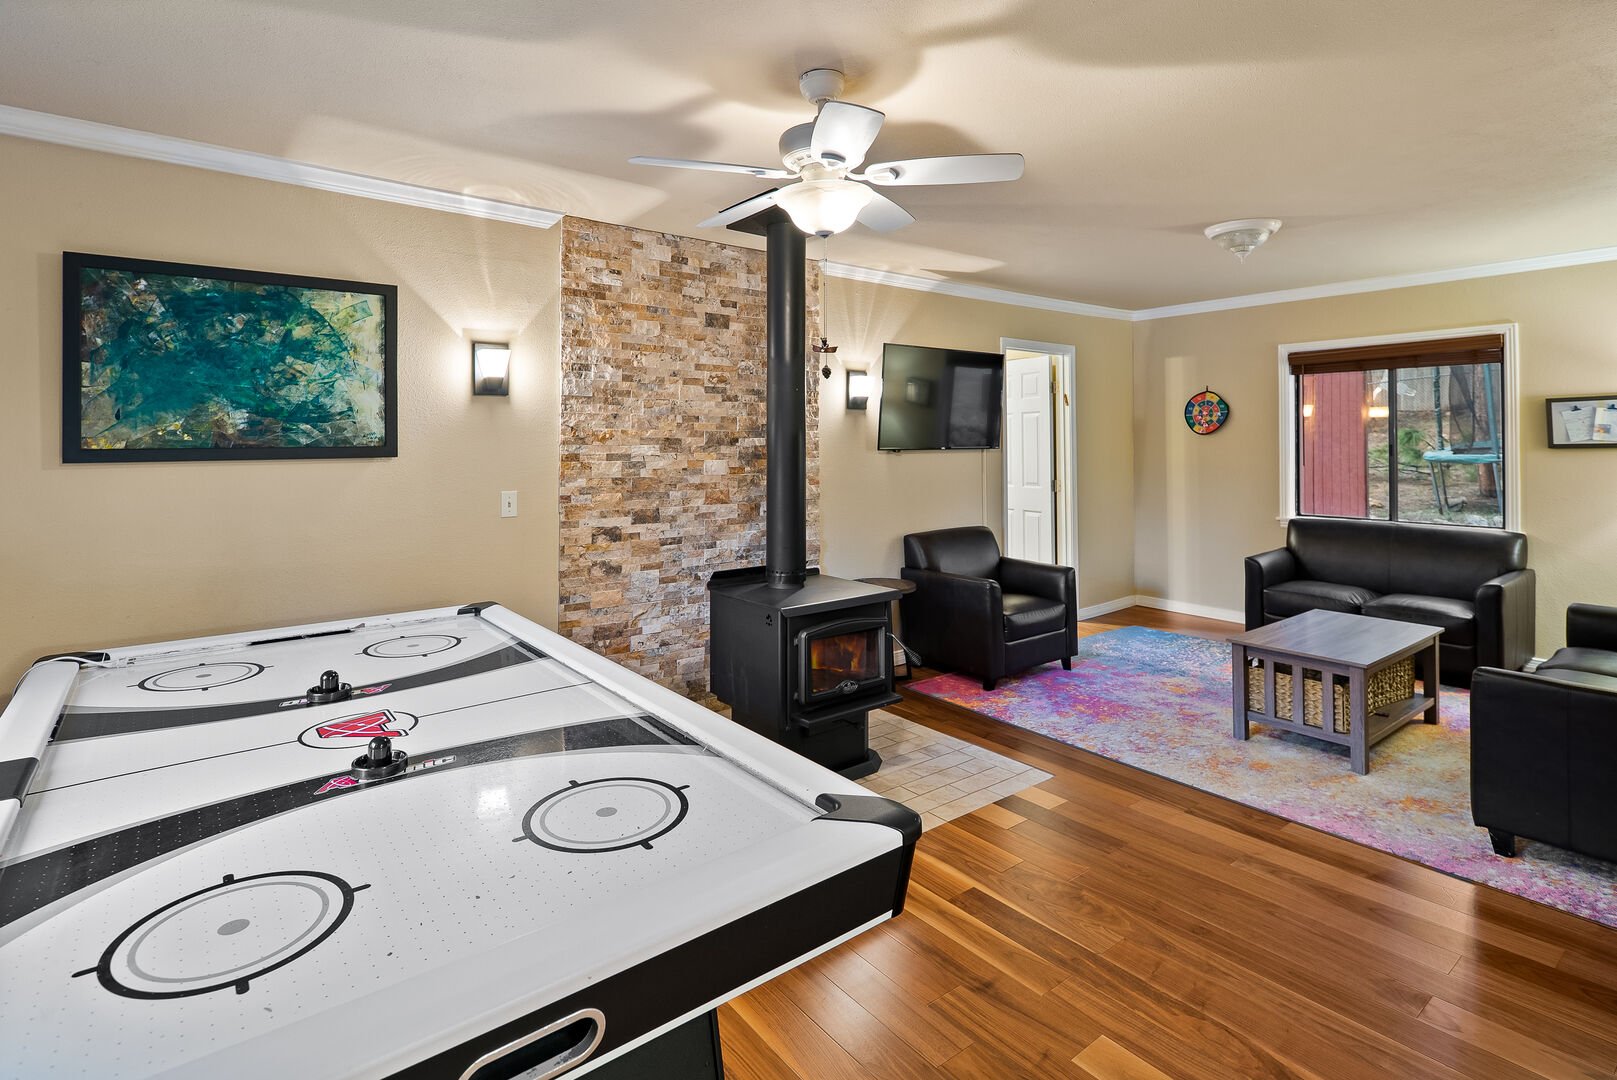 Living room offers a fireplace and hockey table.